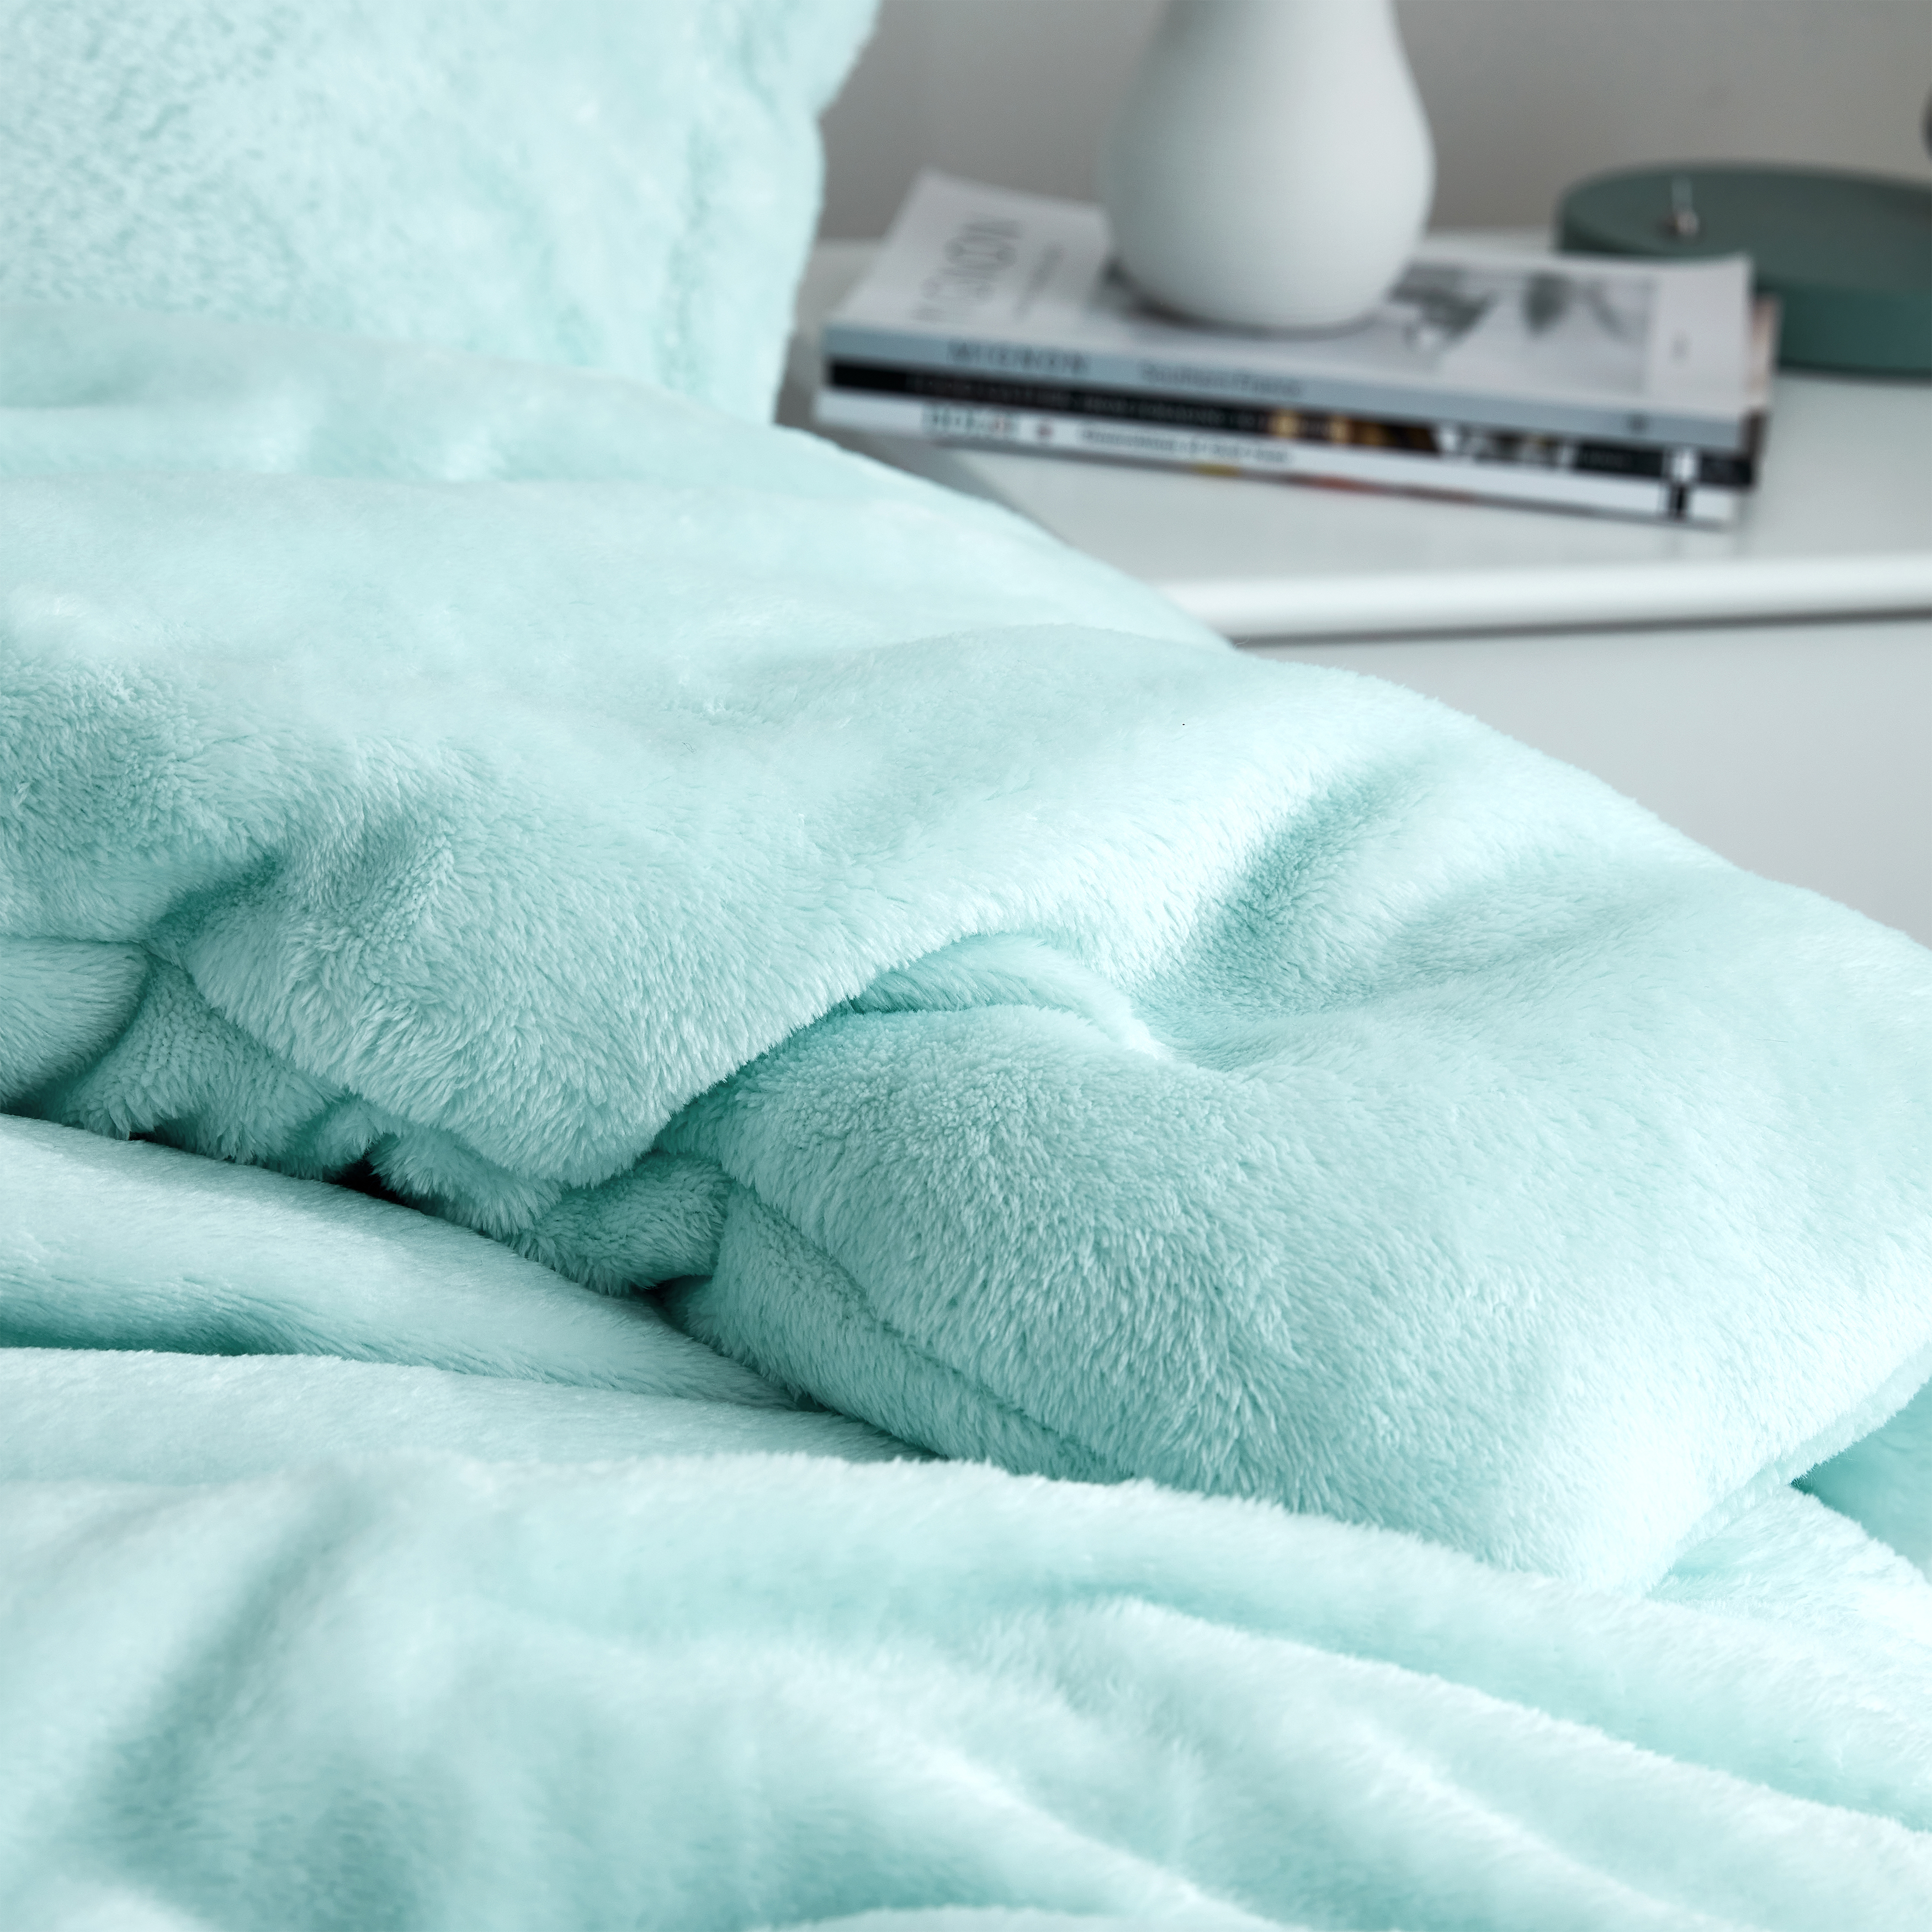 Coma Inducer® Oversized Queen Comforter - Me Sooo Comfy - Hushed Mint